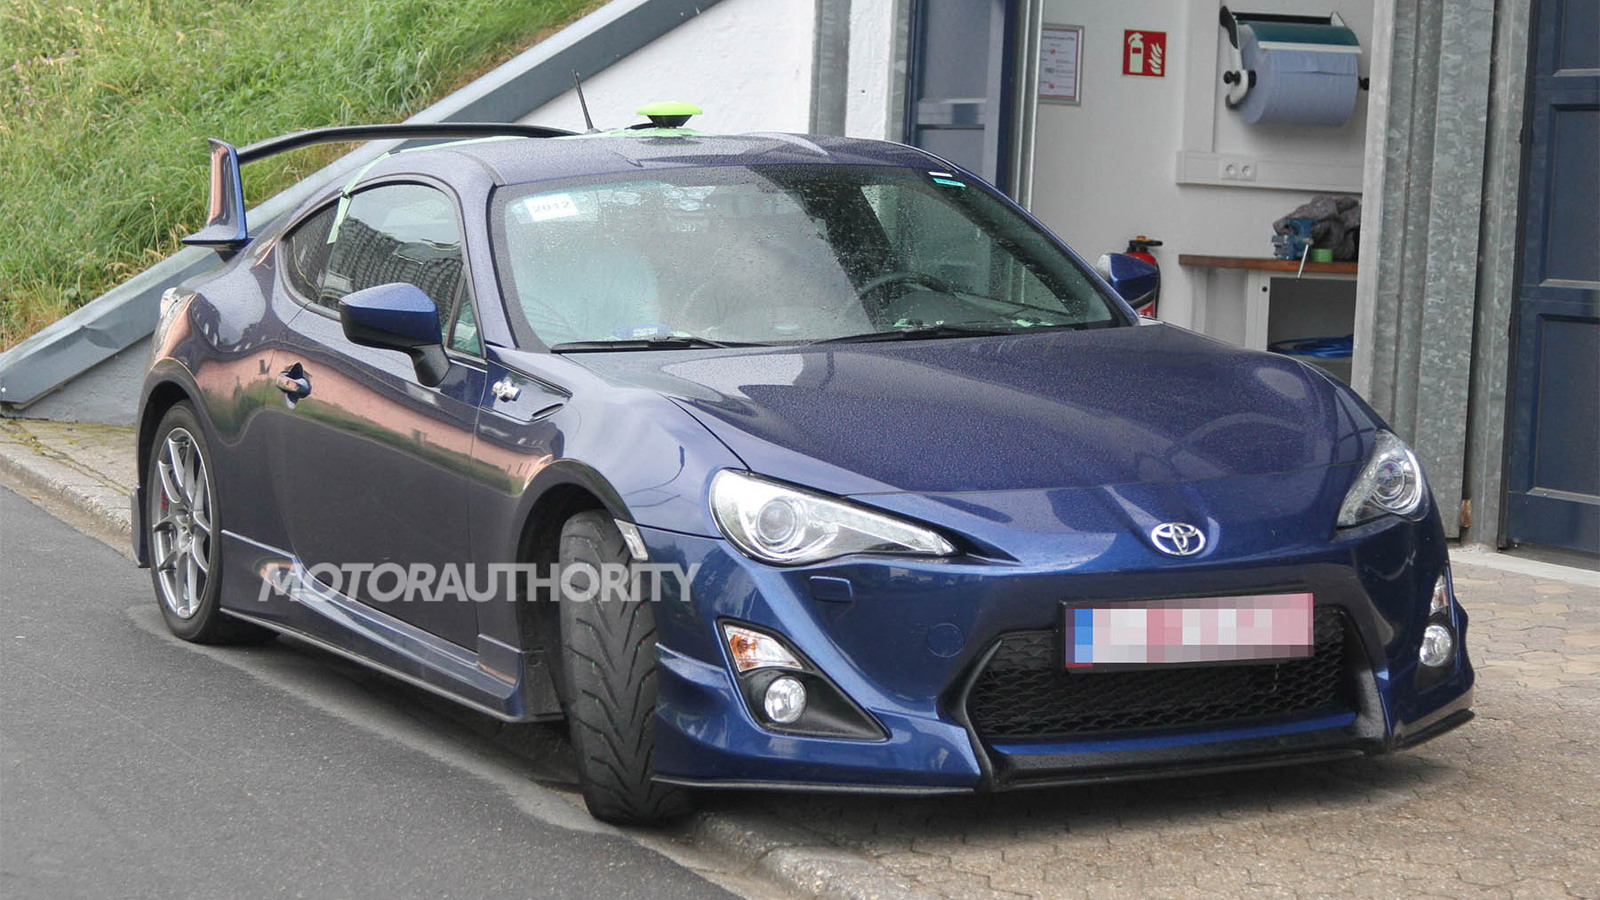 Toyota GT 86 with factory aero kit testing in Europe